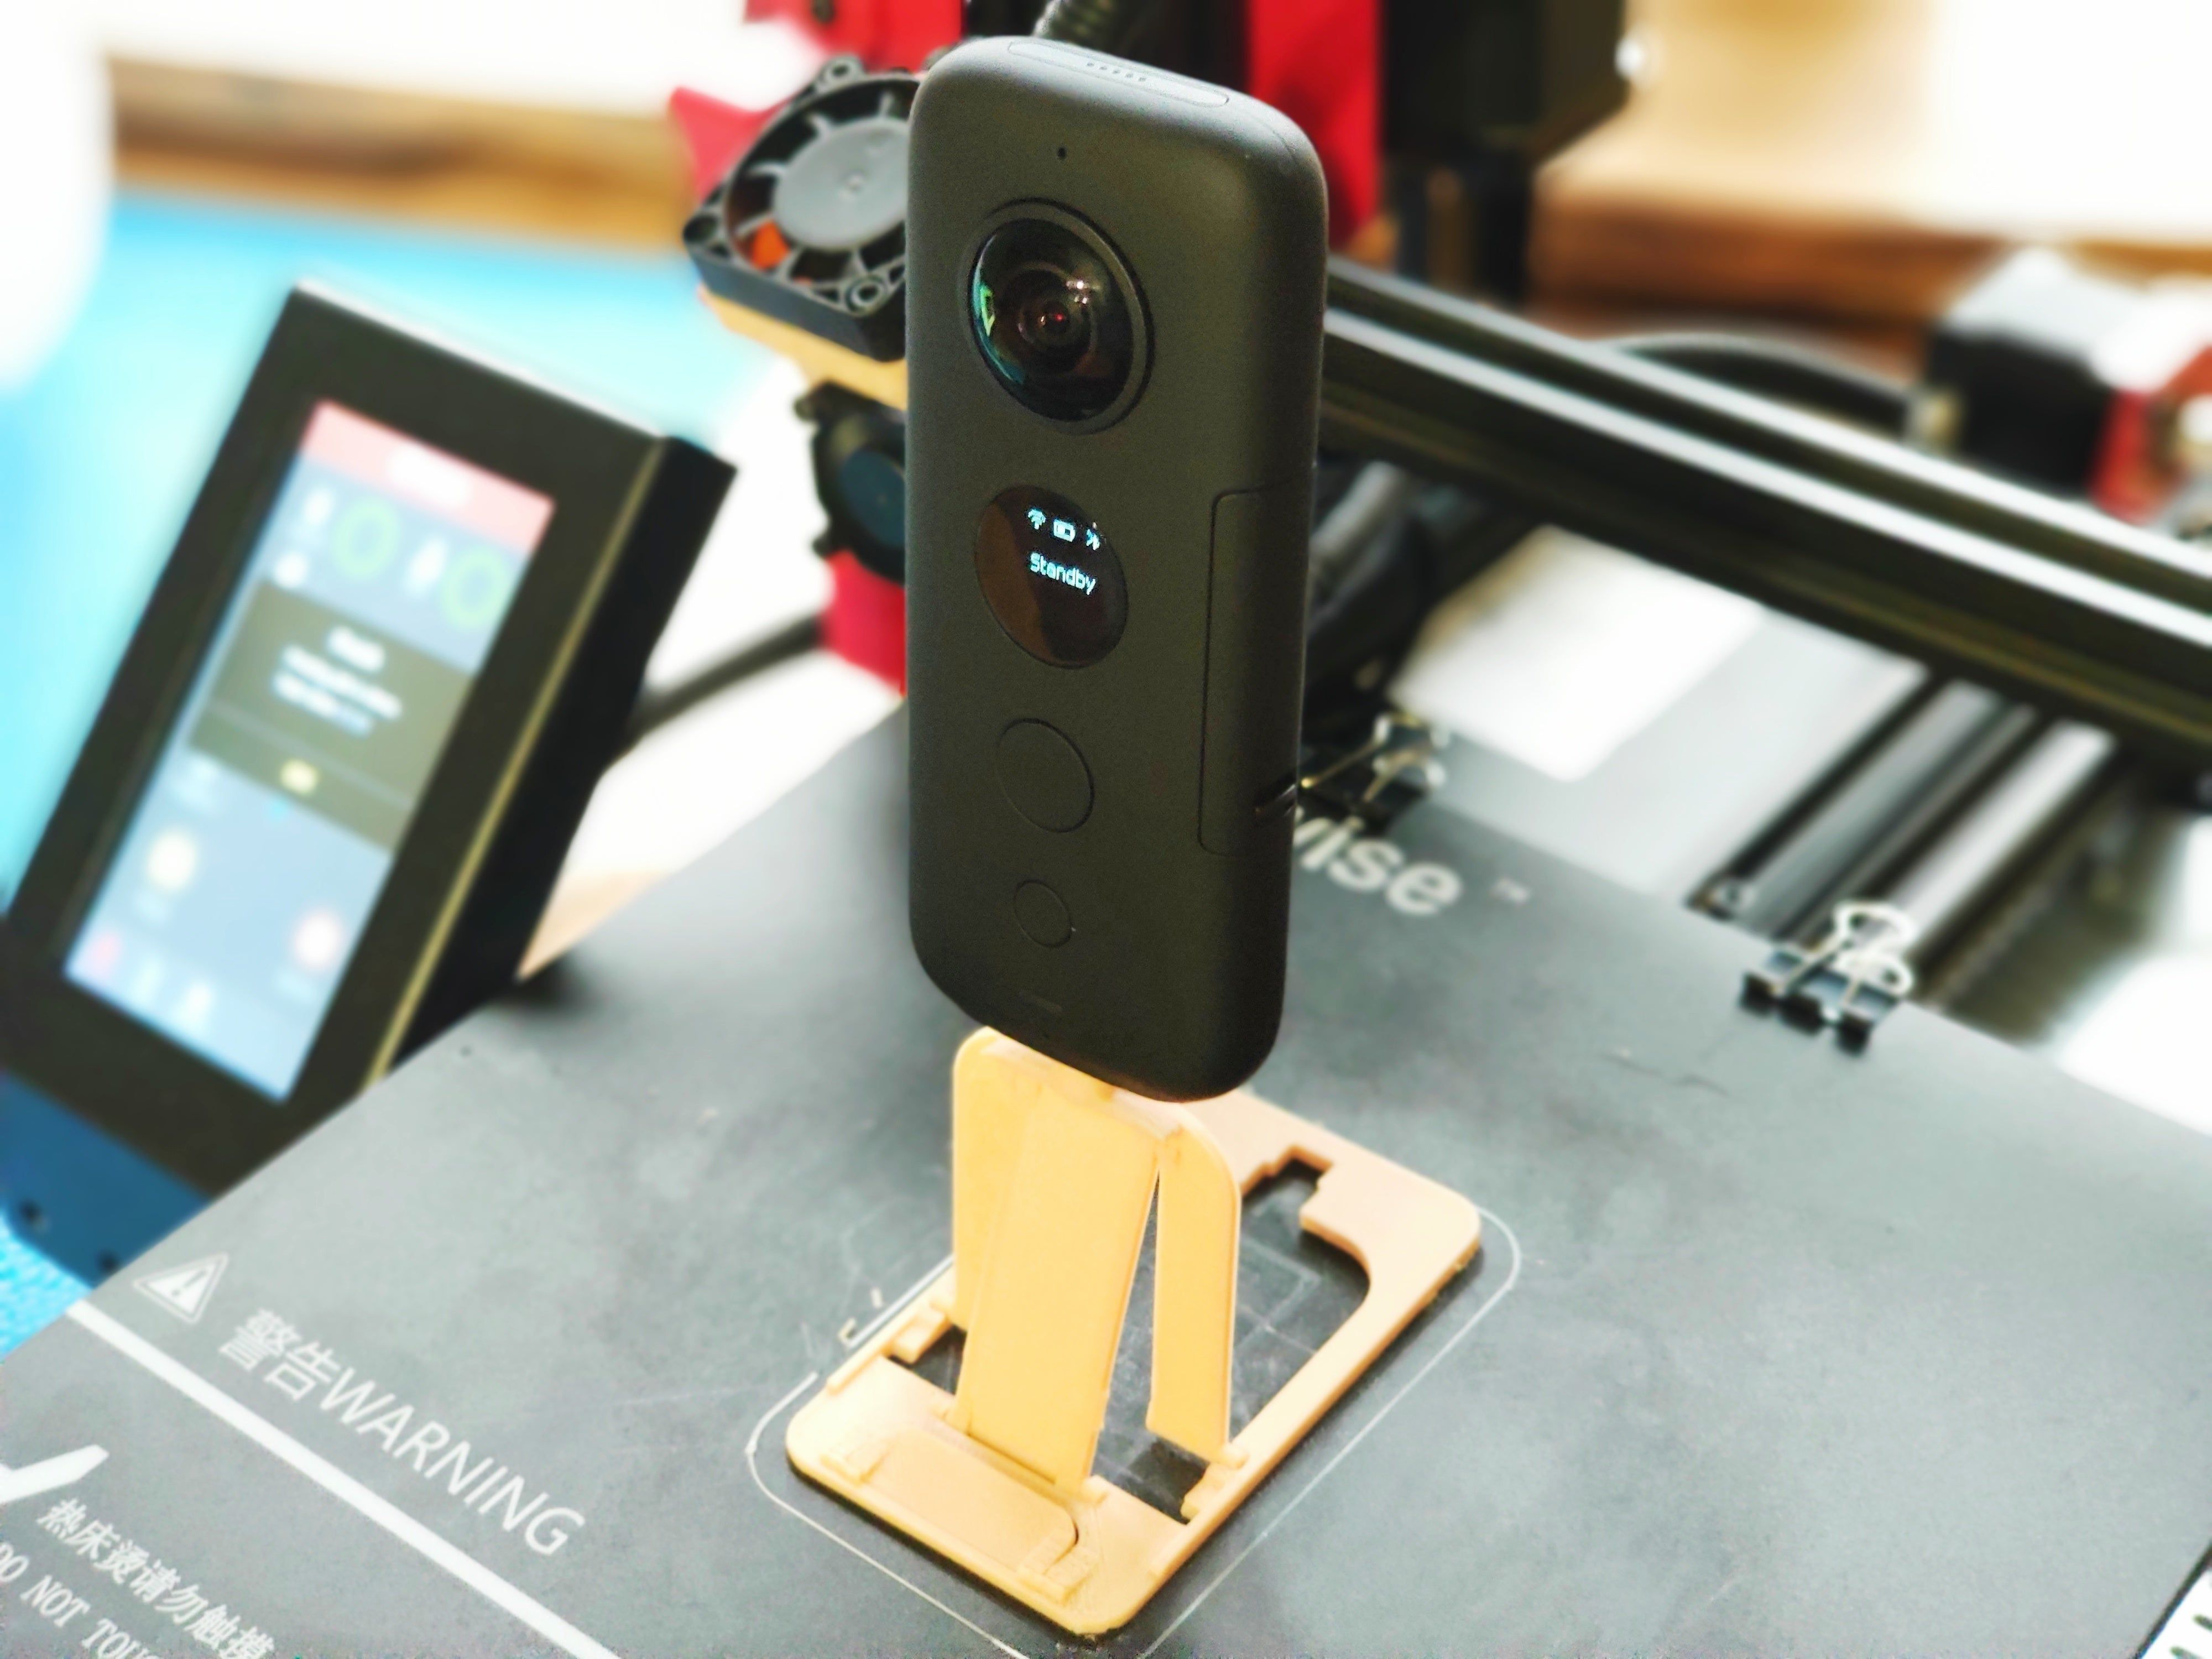 IMG_20190818_192508.jpg Download free STL file Credit Card Sized Tripod and Phone holder • Design to 3D print, FiveNights